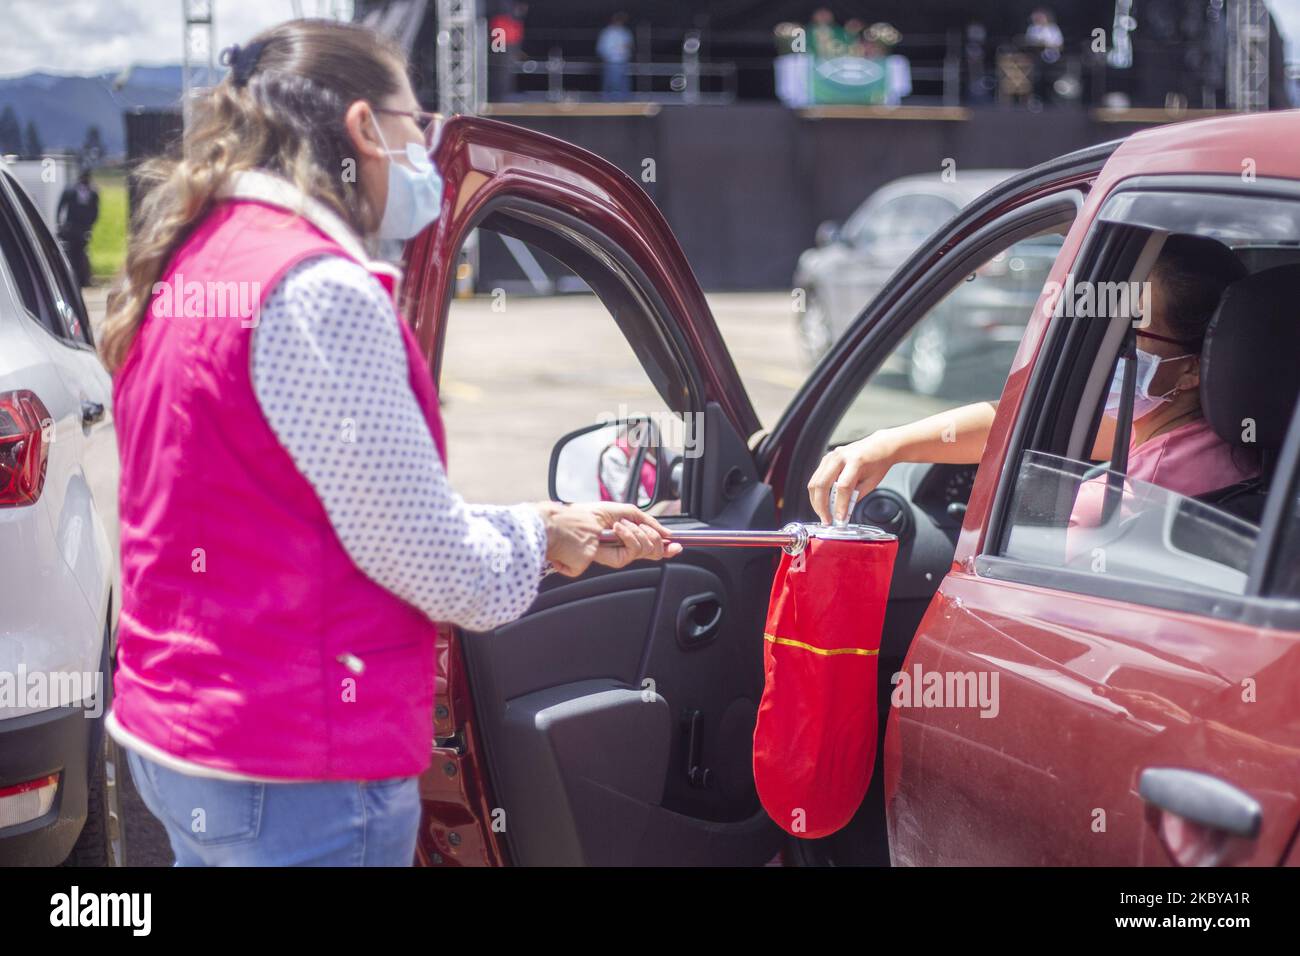 One person passes by each car receiving donations in the car at the Los Andes racecourse in the city of Bogota, Colombia, on September 6, 2020. (Photo by Daniel Garzon Herazo/NurPhoto) Stock Photo